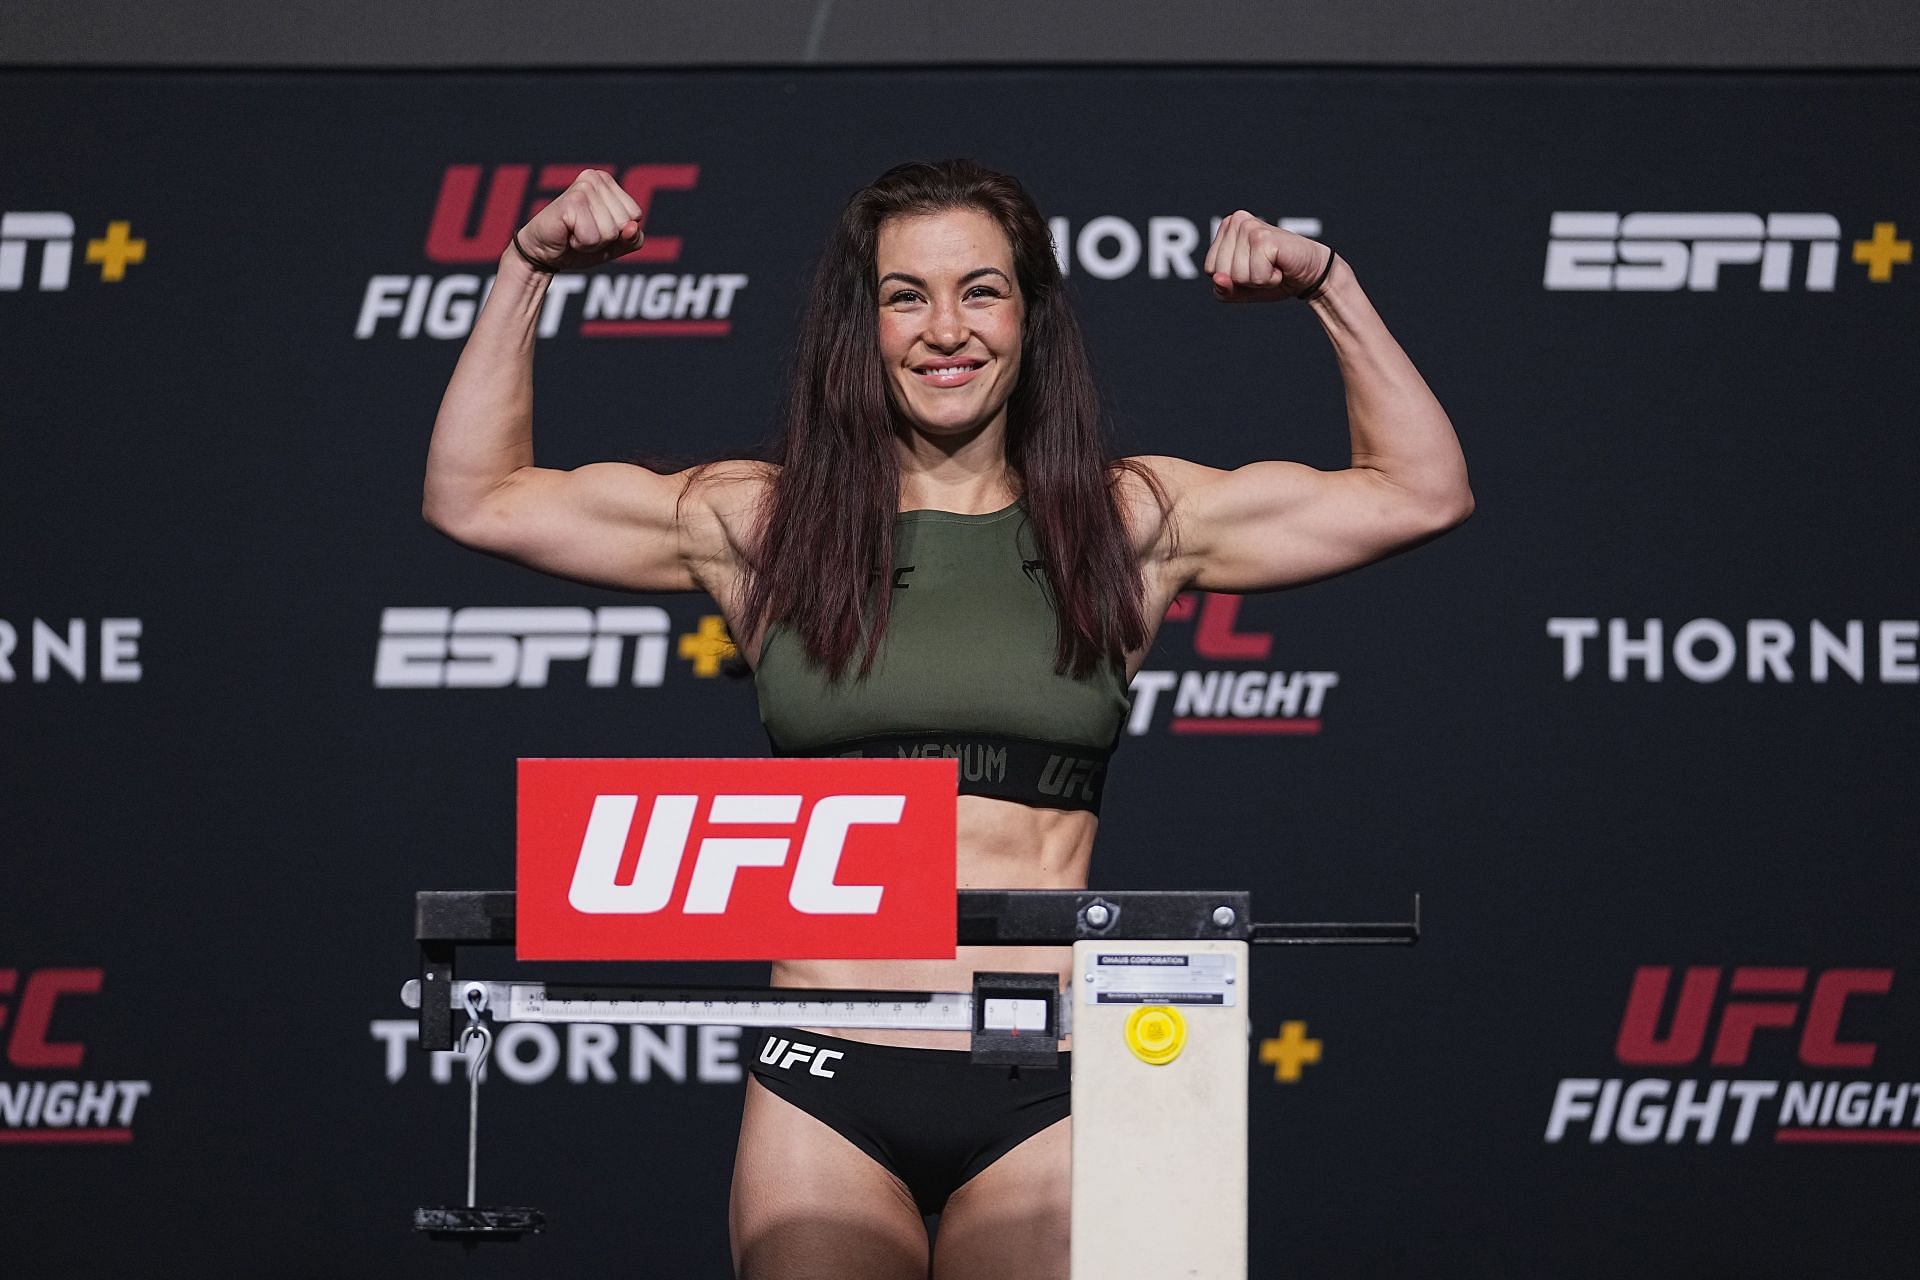 Miesha Tate at UFC Fight Night: Makhachev v Moises Weigh-in (Image courtesy of Getty)